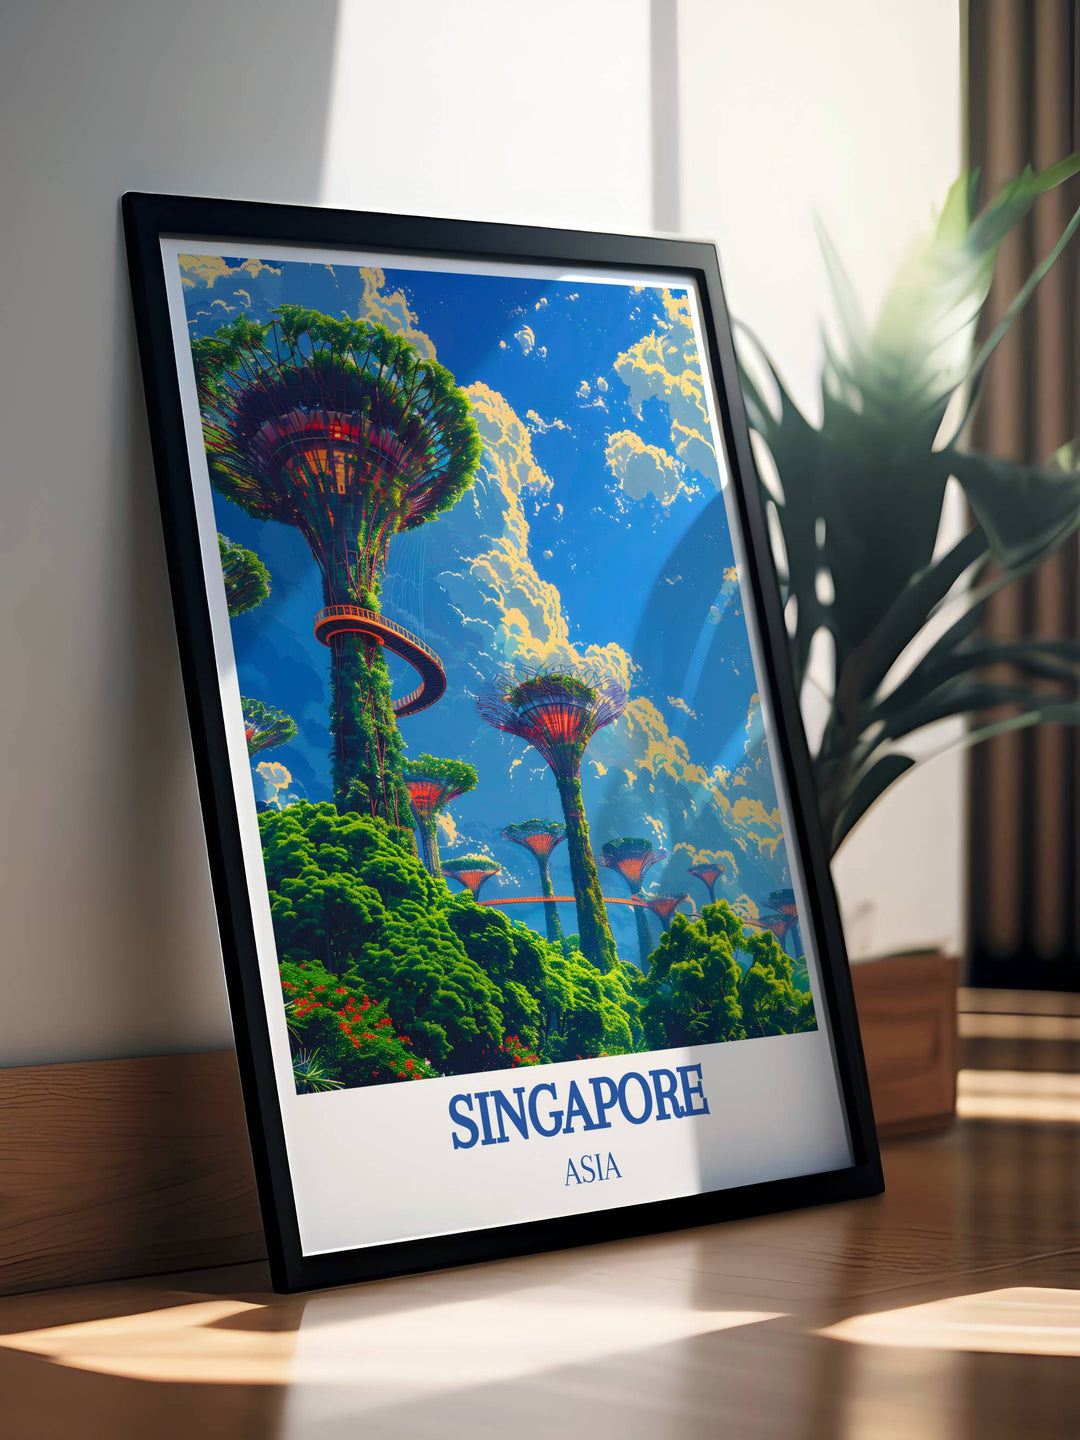 Stunning travel poster of Singapore, featuring the famous Gardens by the Bay, a must-have for anyone who loves travel and Southeast Asian culture.